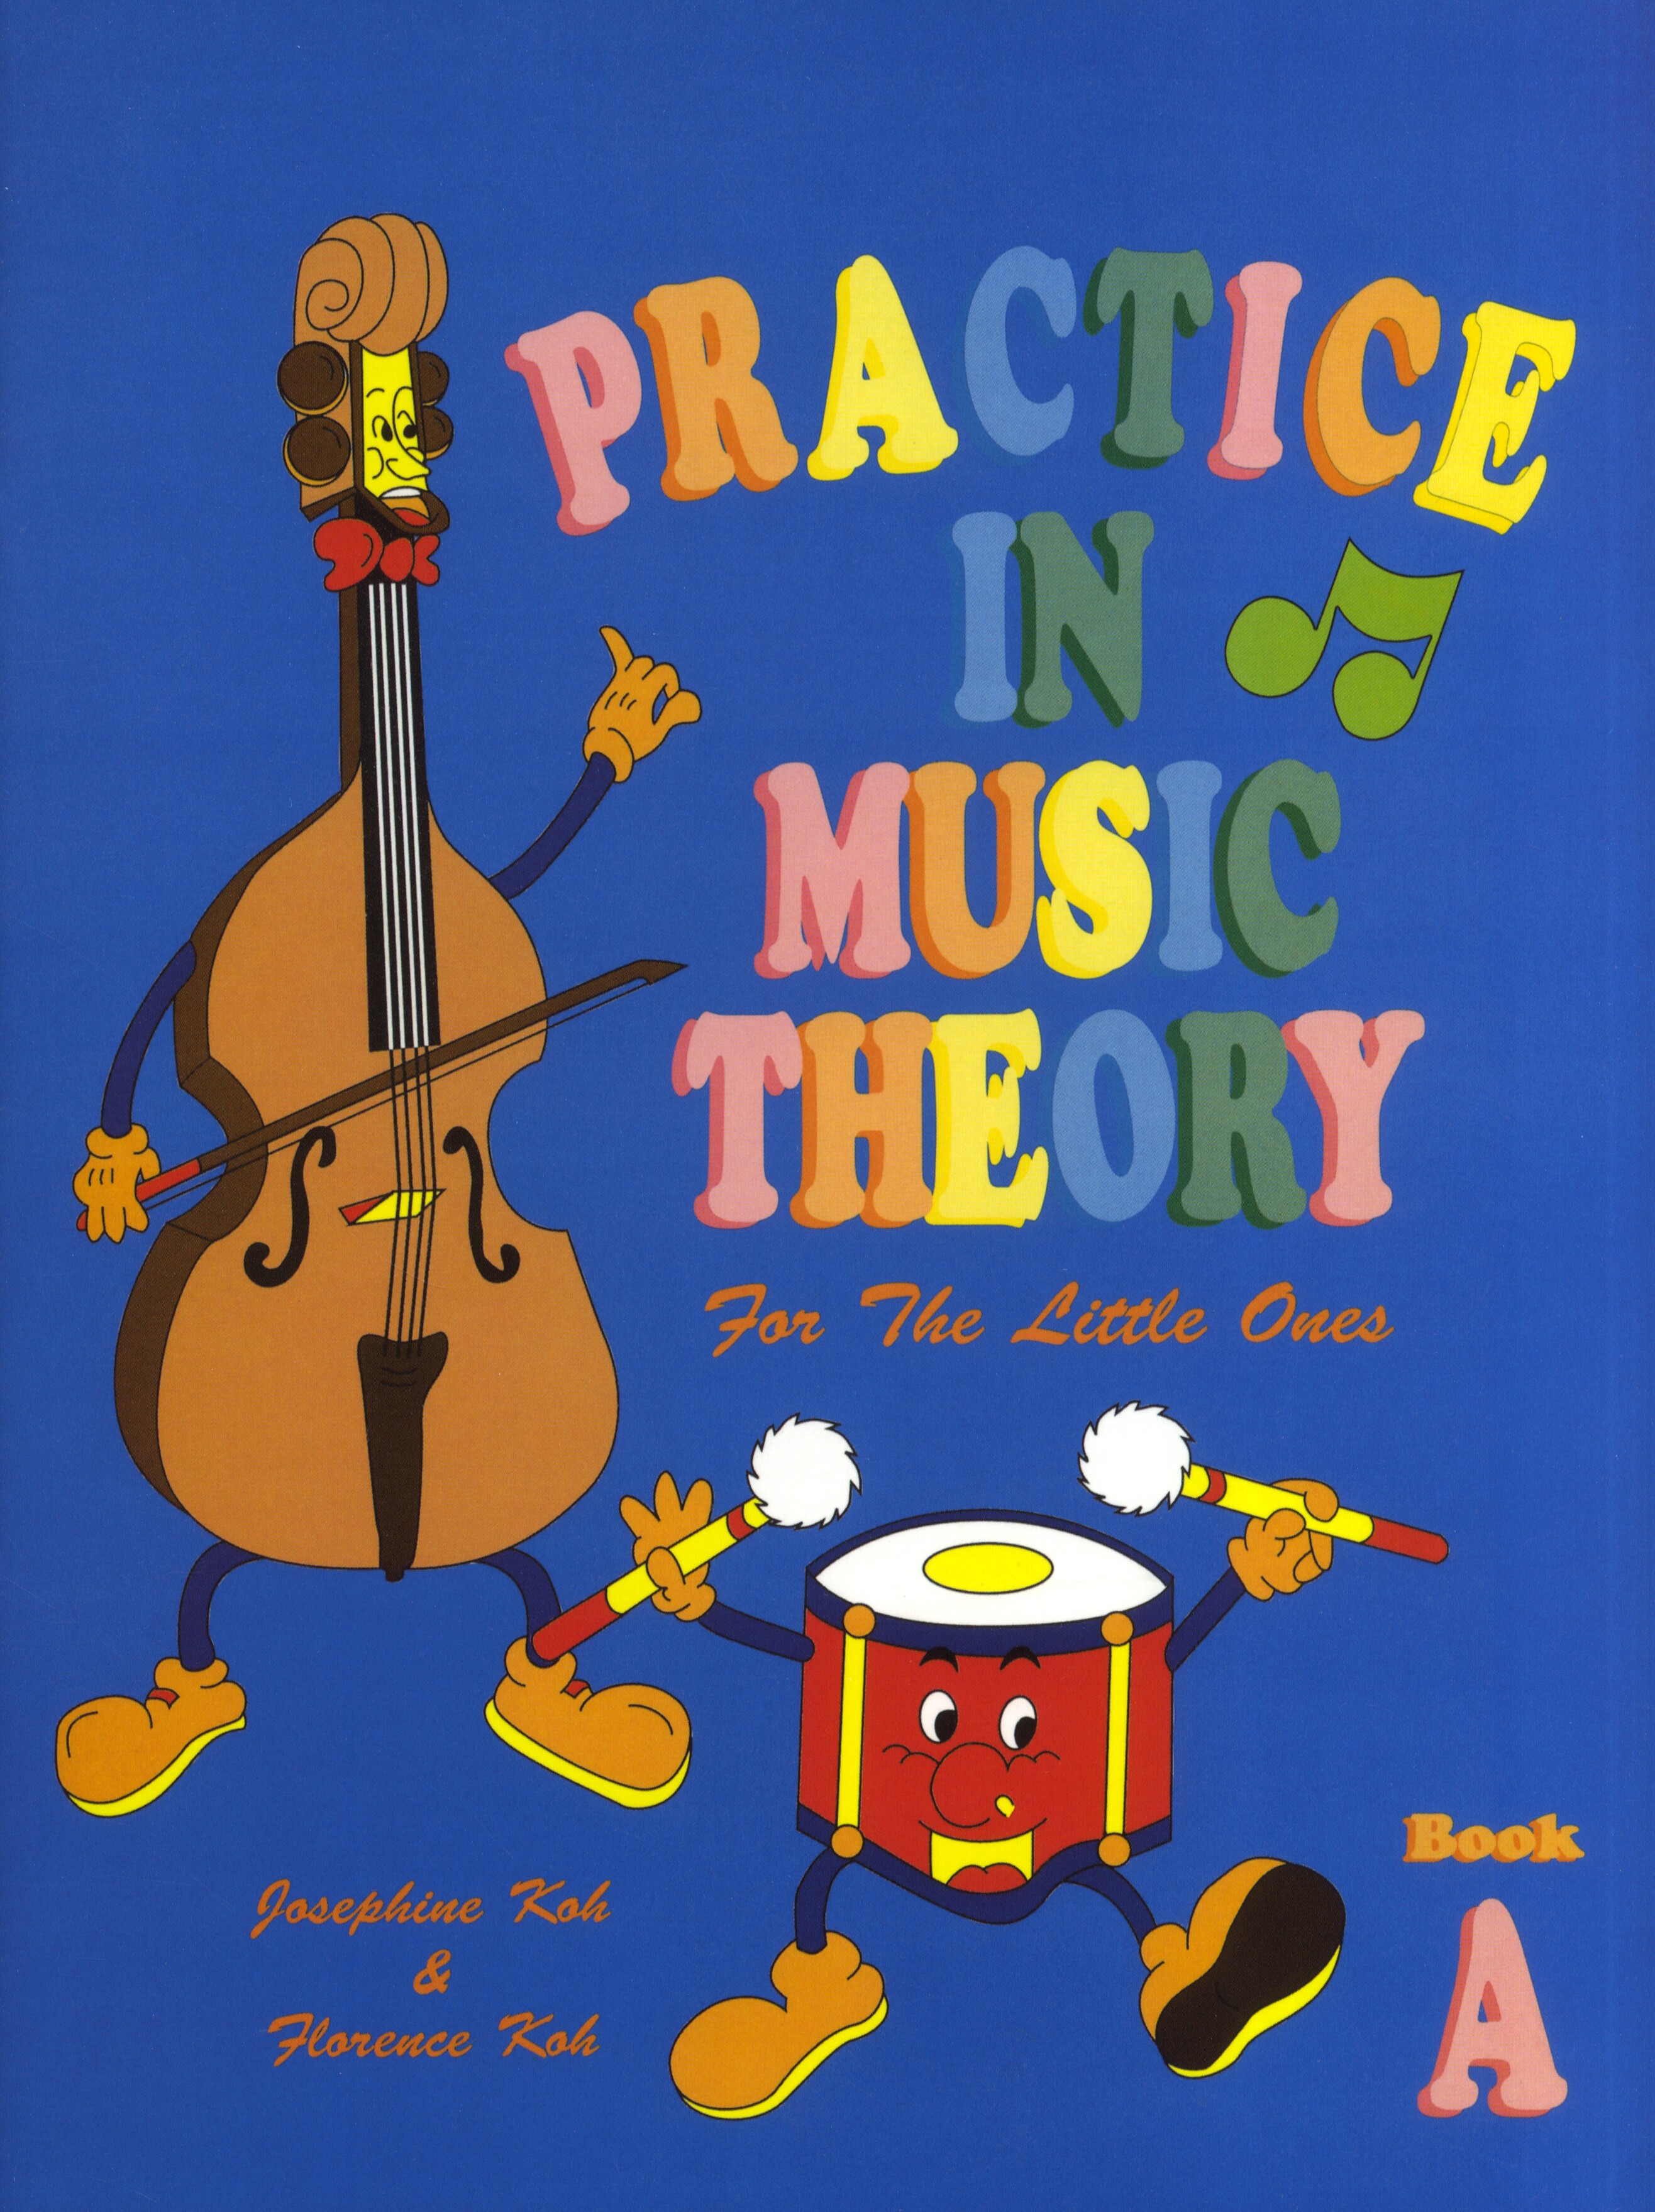 Josephine Koh Florence Koh: Practice In Music Theory For The Little Ones-Bk A: